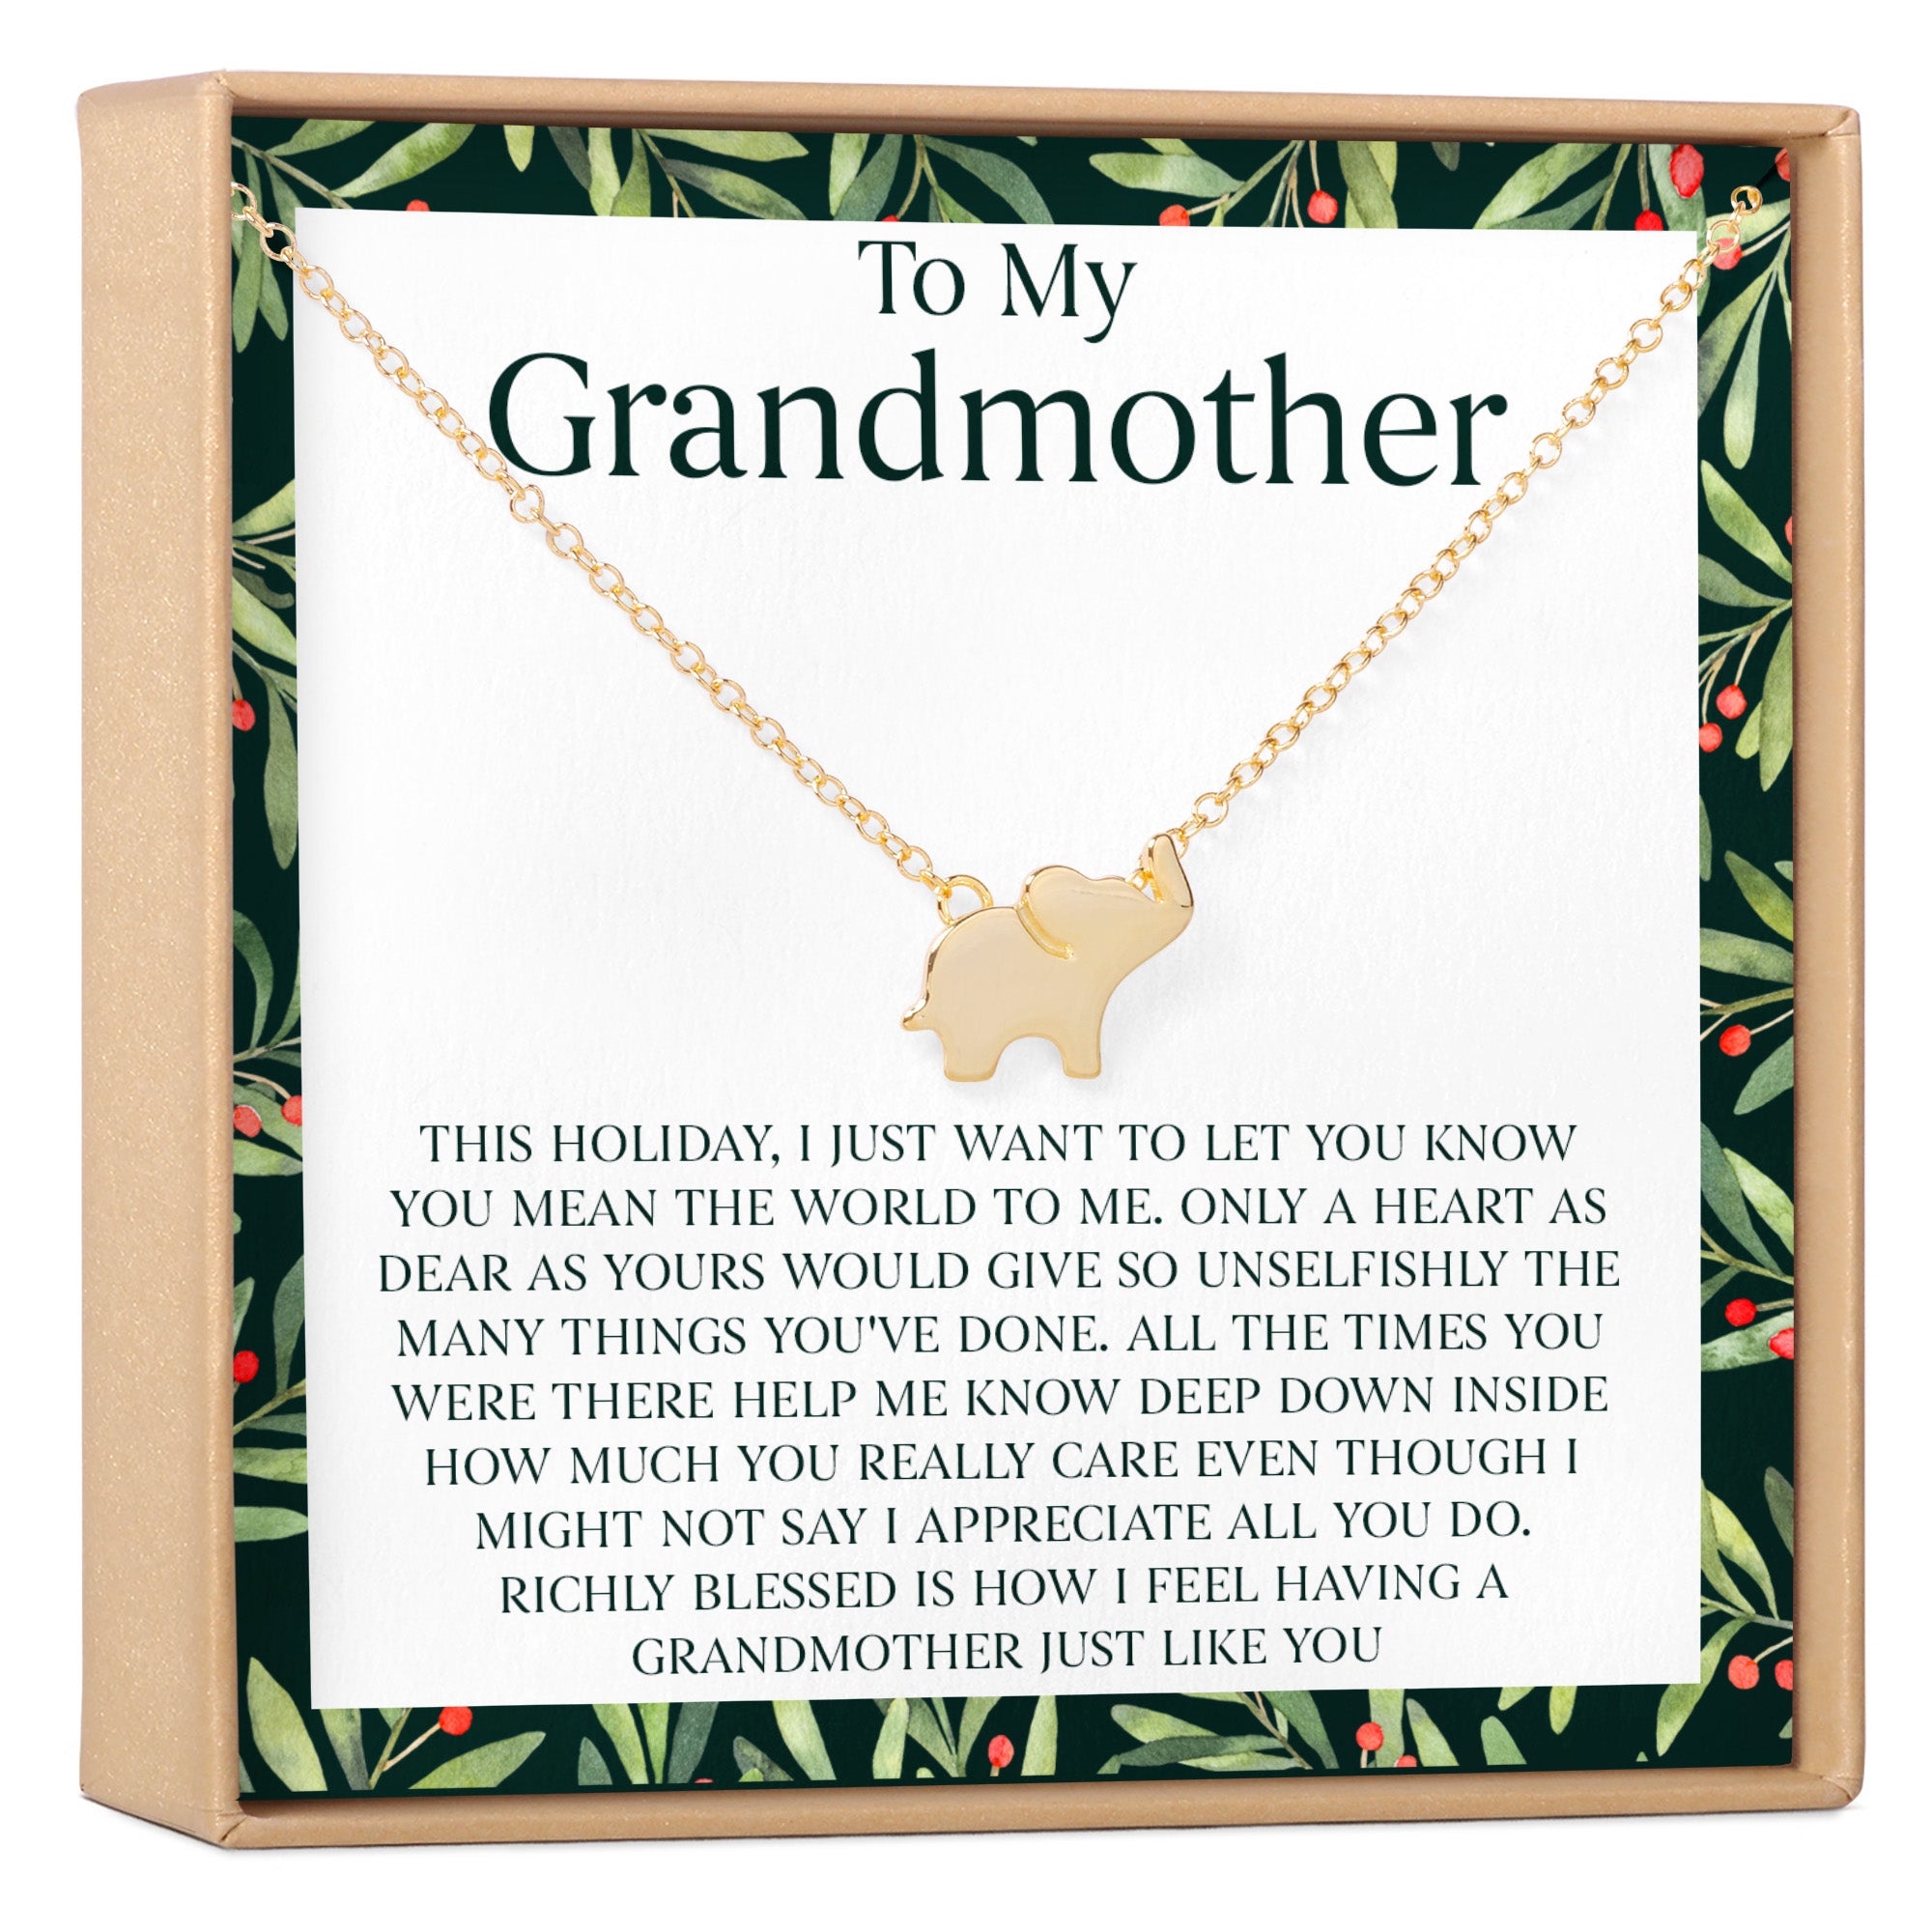 Anavia Grandma Necklace, Grandmother Necklace, Grandma Jewelry Gift, Gift  for Grandma, Nana Gift, Christmas Gift for Her, Double Cubes Pendant